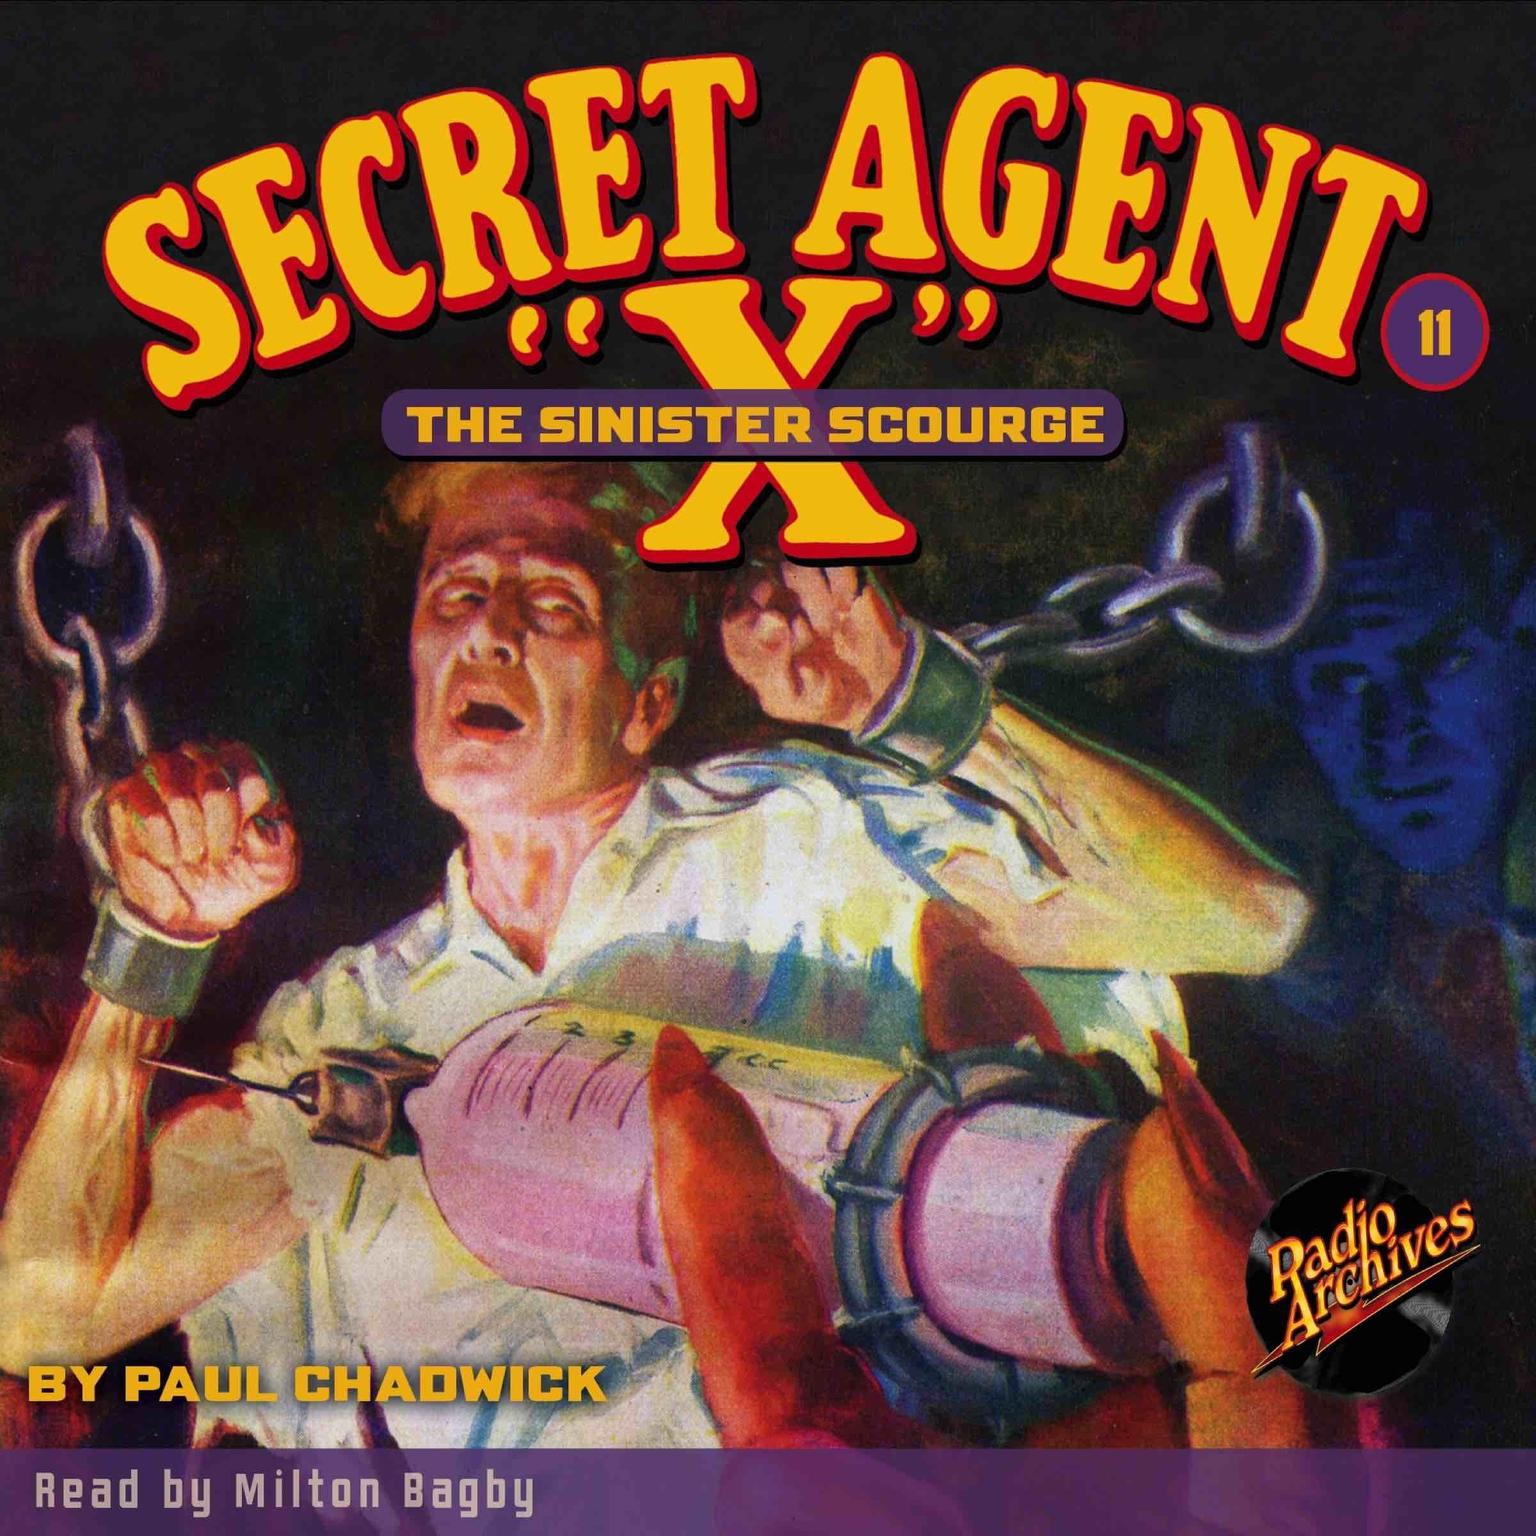 Secret Agent X: Sinister Scourge Audiobook, by Paul Chadwick